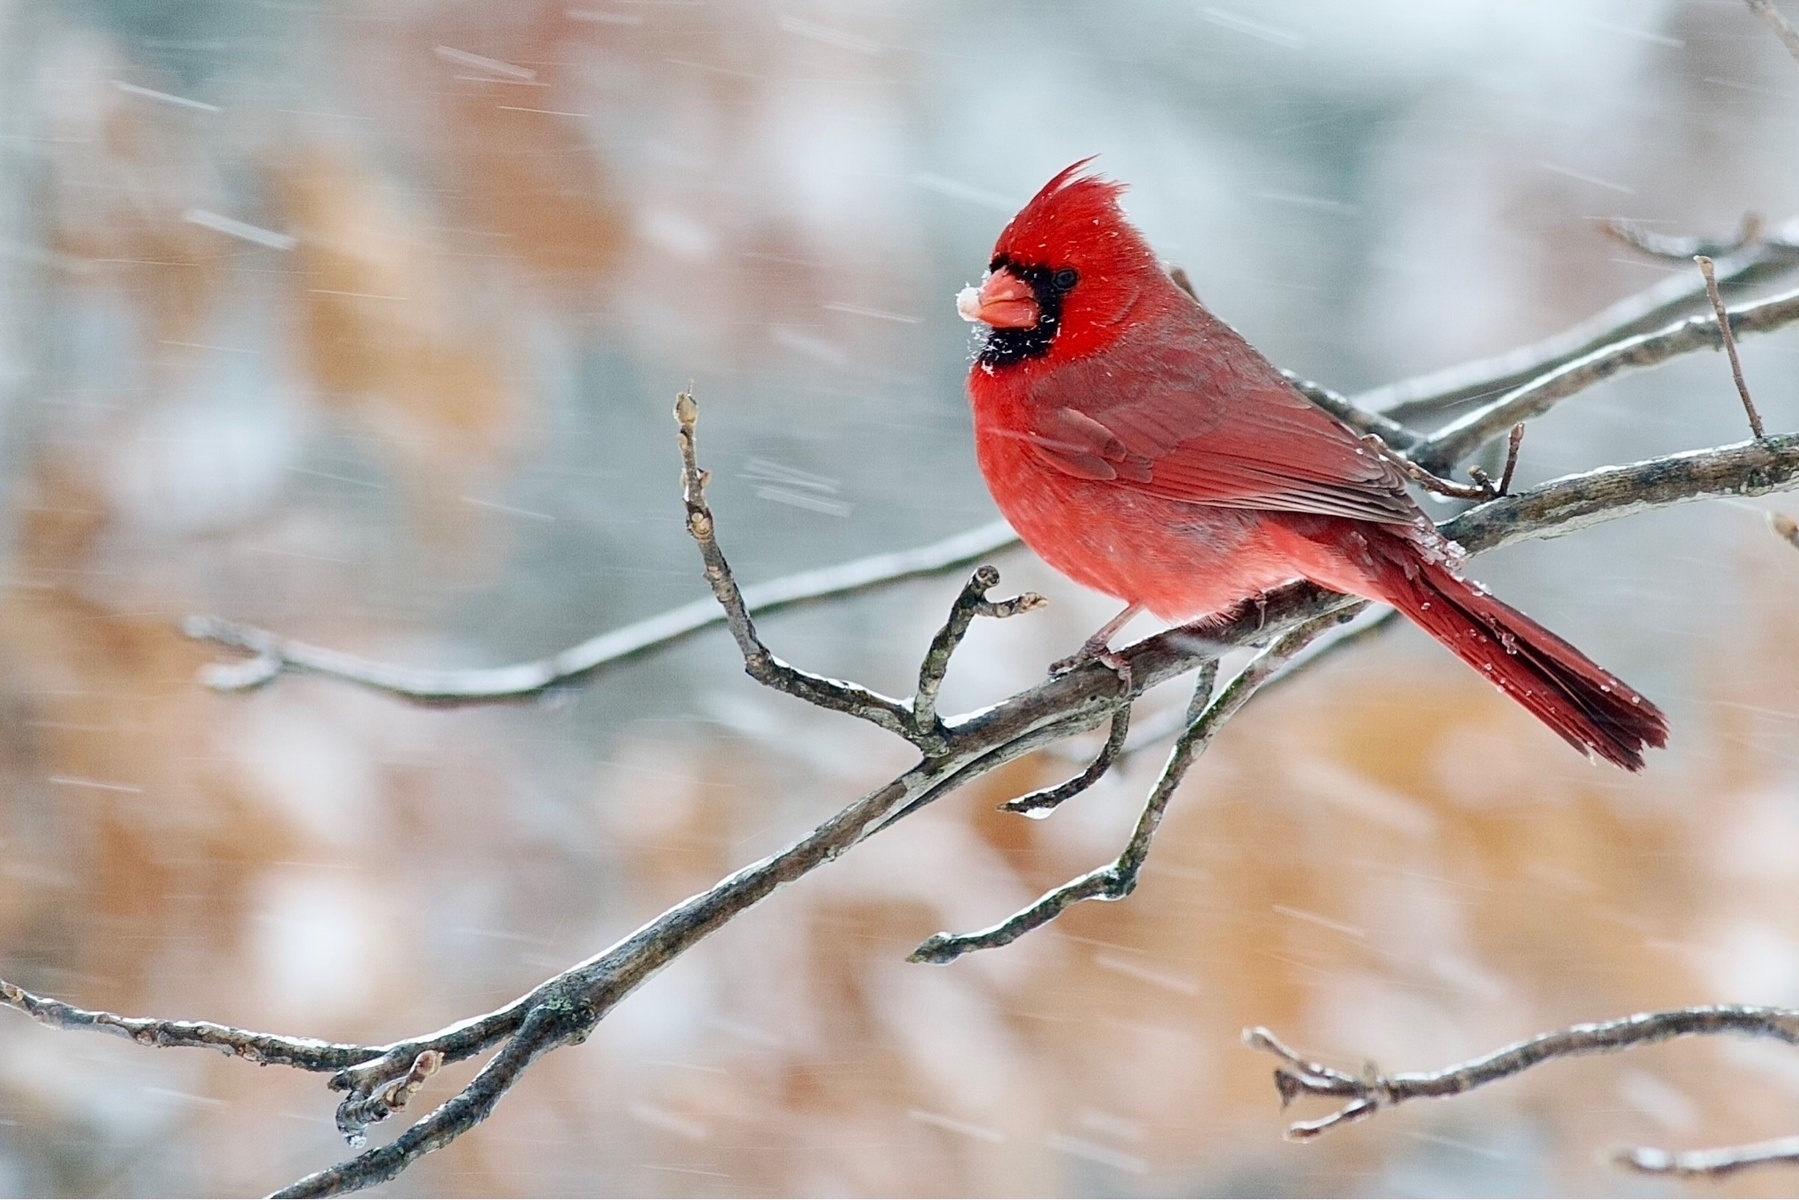 A vibrant red bird  is perched on a branch, blurred snow coming down around it